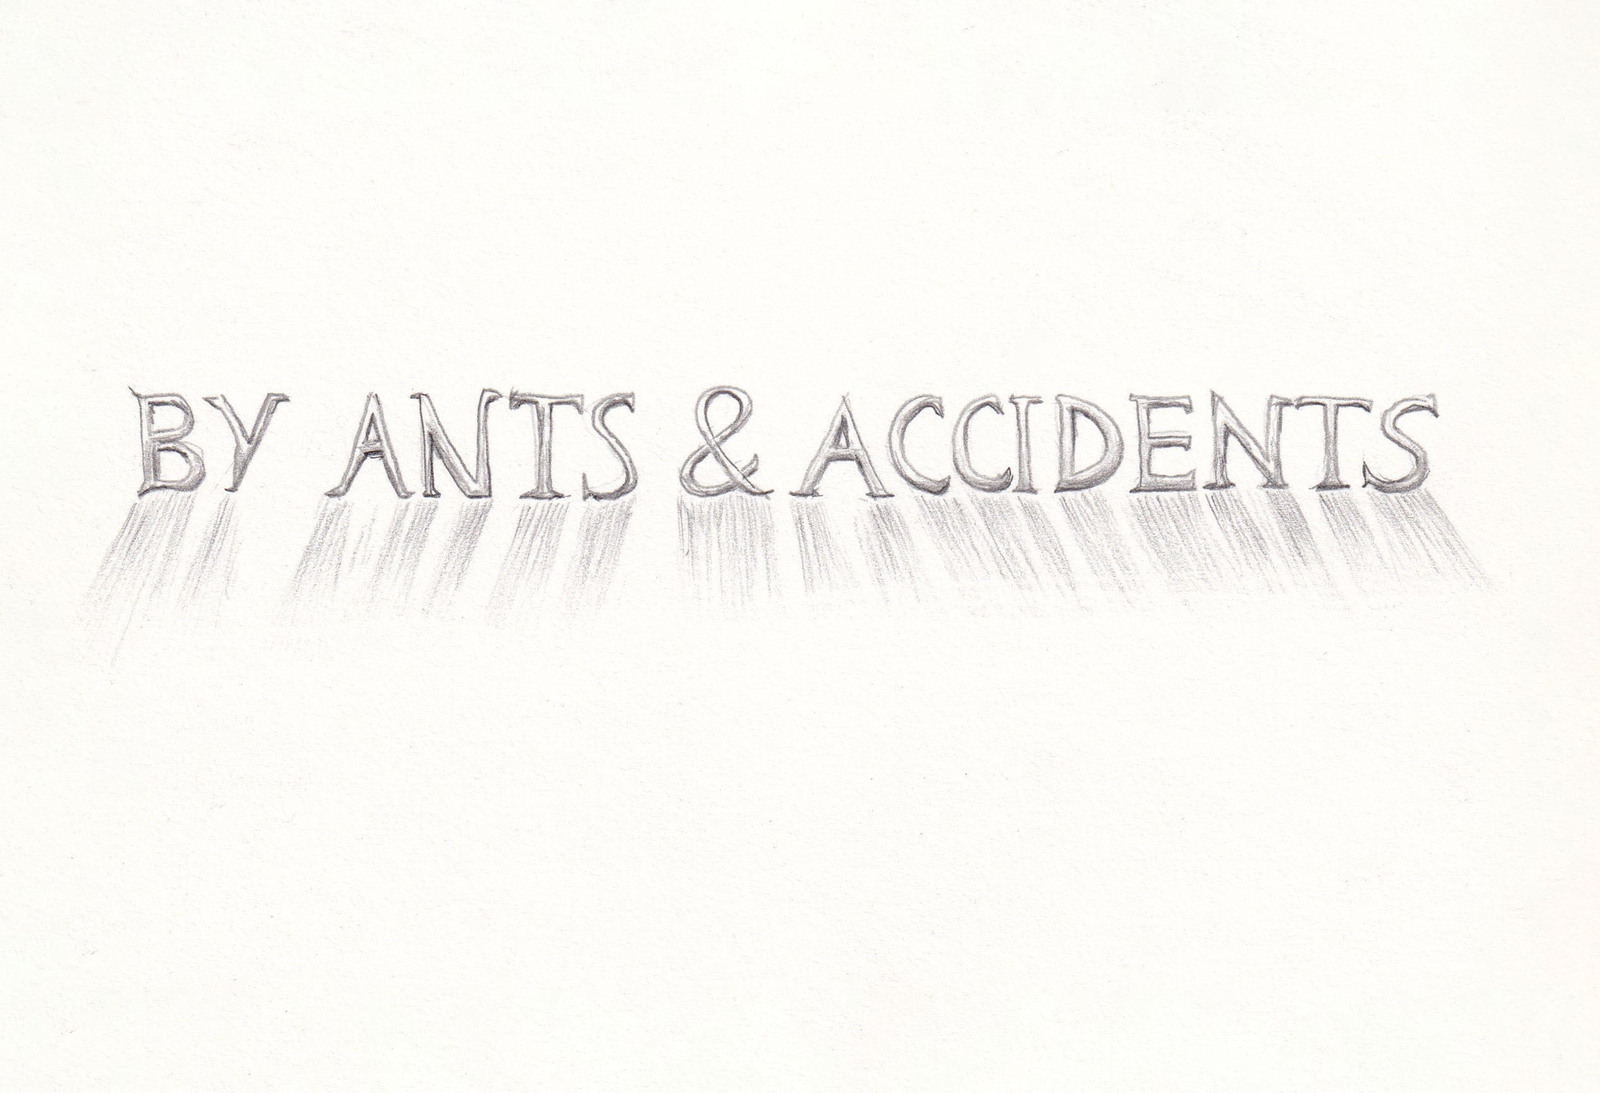 By ants & accidents